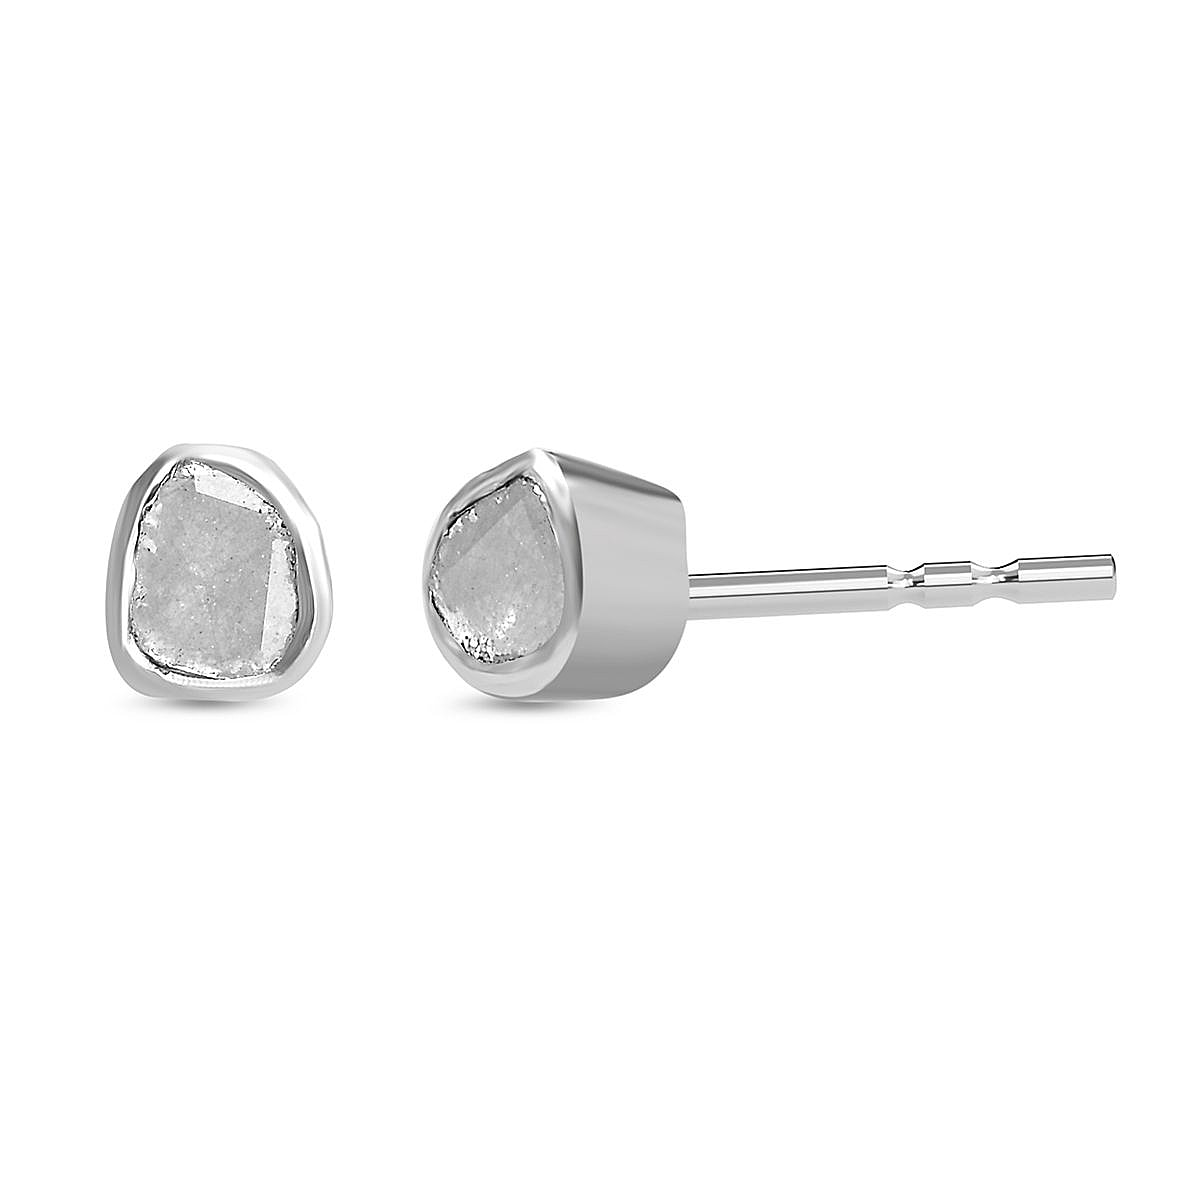 Artisan Crafted Natural Polki Diamond Earrings in Platinum Overlay Sterling Silver